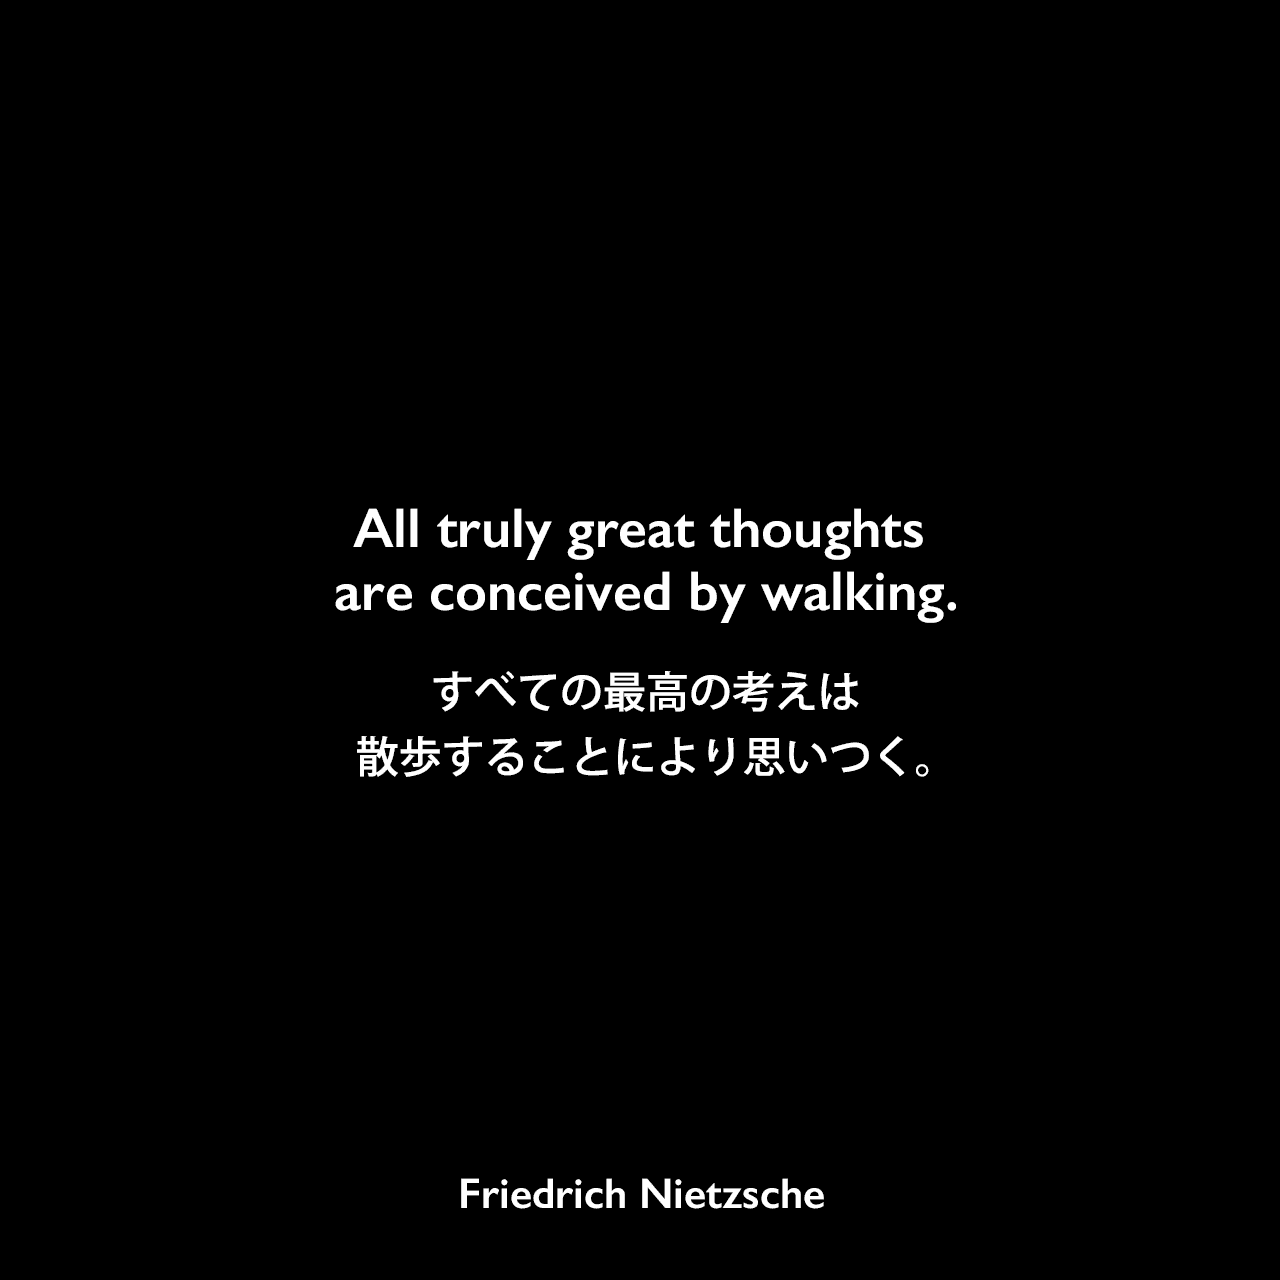 All truly great thoughts are conceived by walking.すべての最高の考えは、散歩することにより思いつく。- ニーチェの本「Twilight of the Idols」よりFriedrich Nietzsche